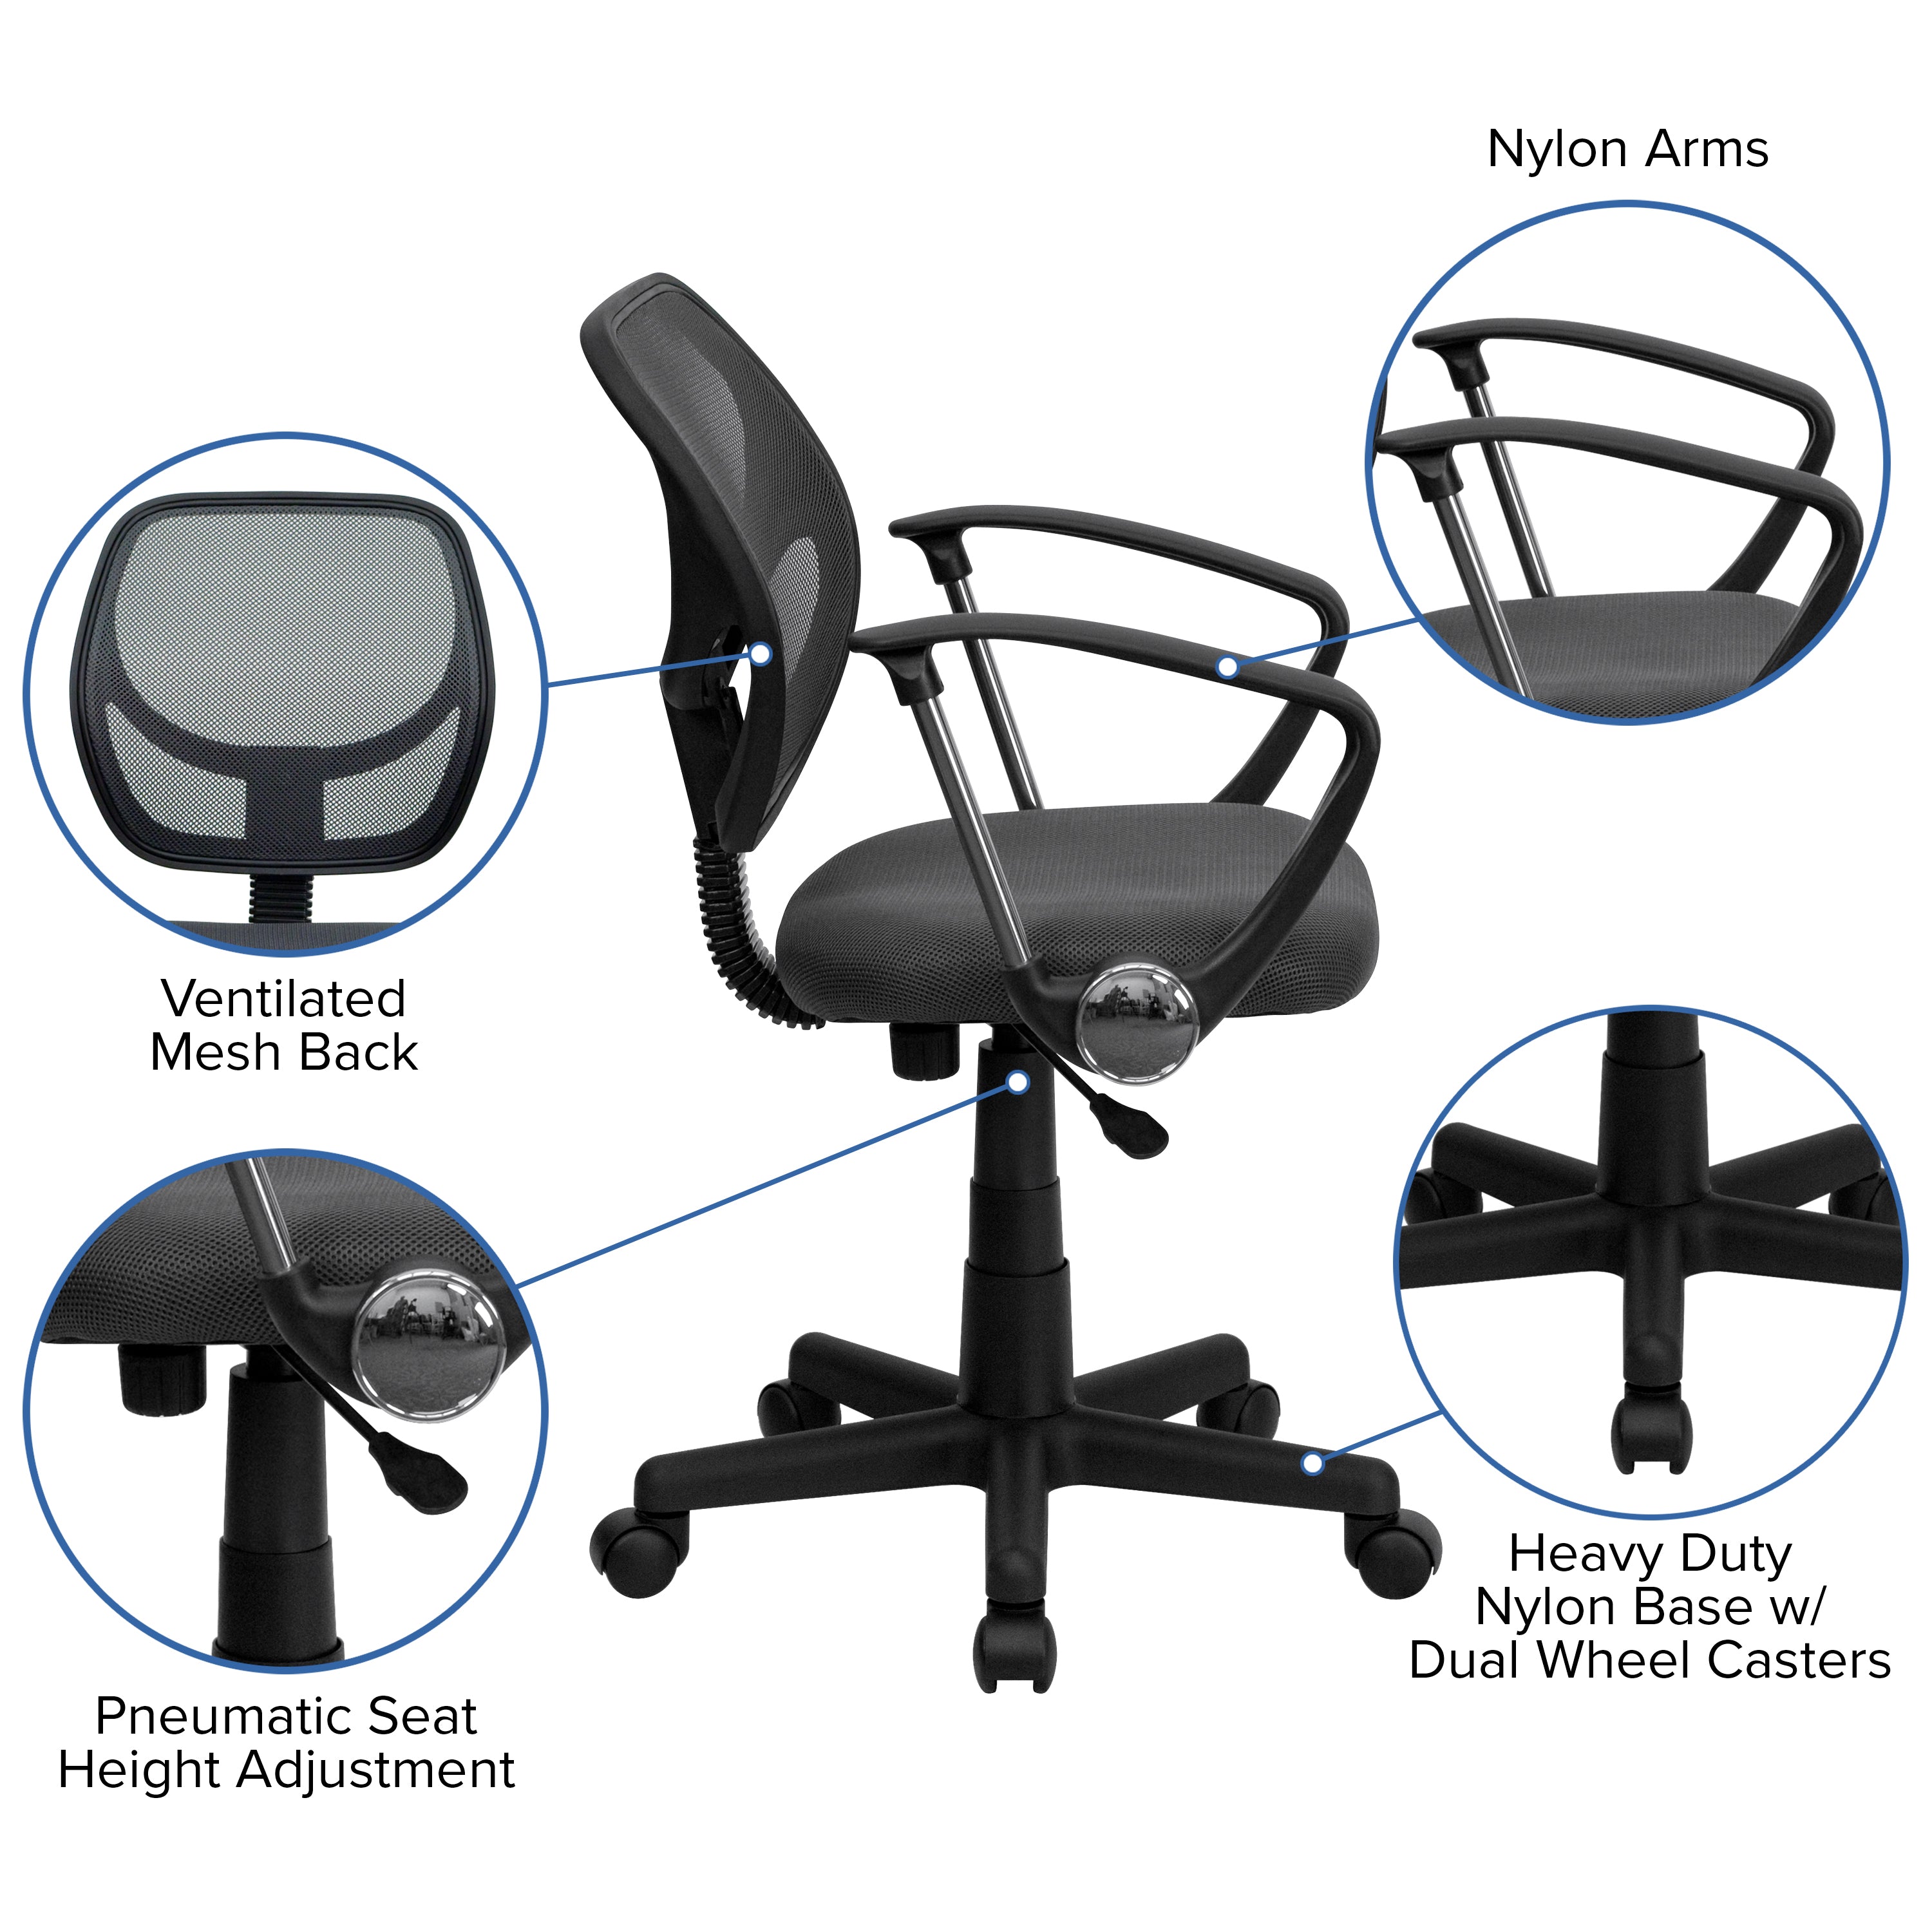 Low Back Mesh Swivel Task Office Chair with Curved Square Back and Arms-Office Chair-Flash Furniture-Wall2Wall Furnishings